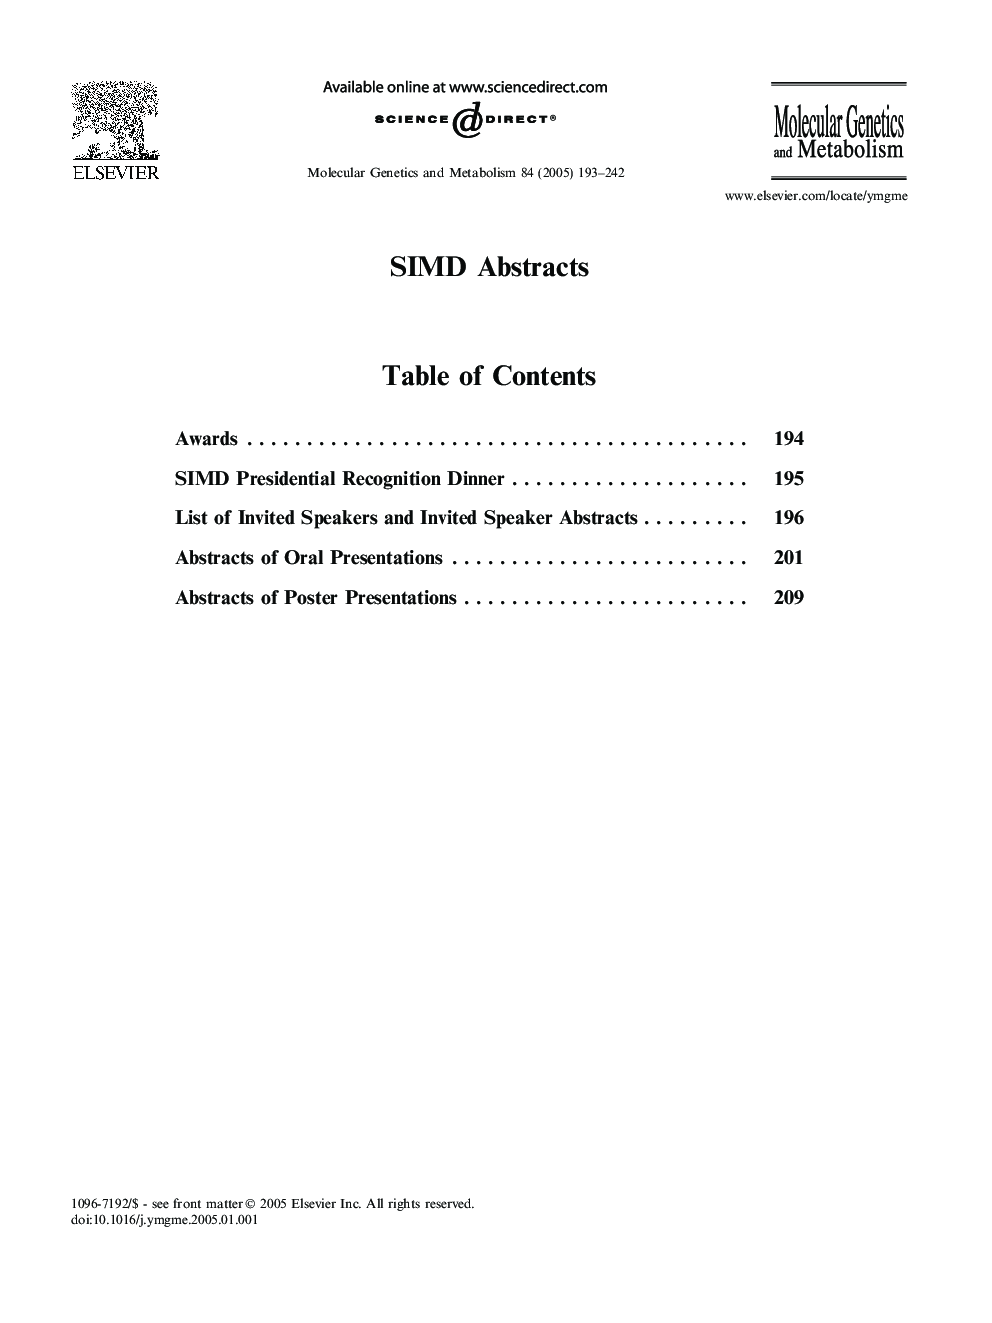 SIMD Abstracts Issue 2005